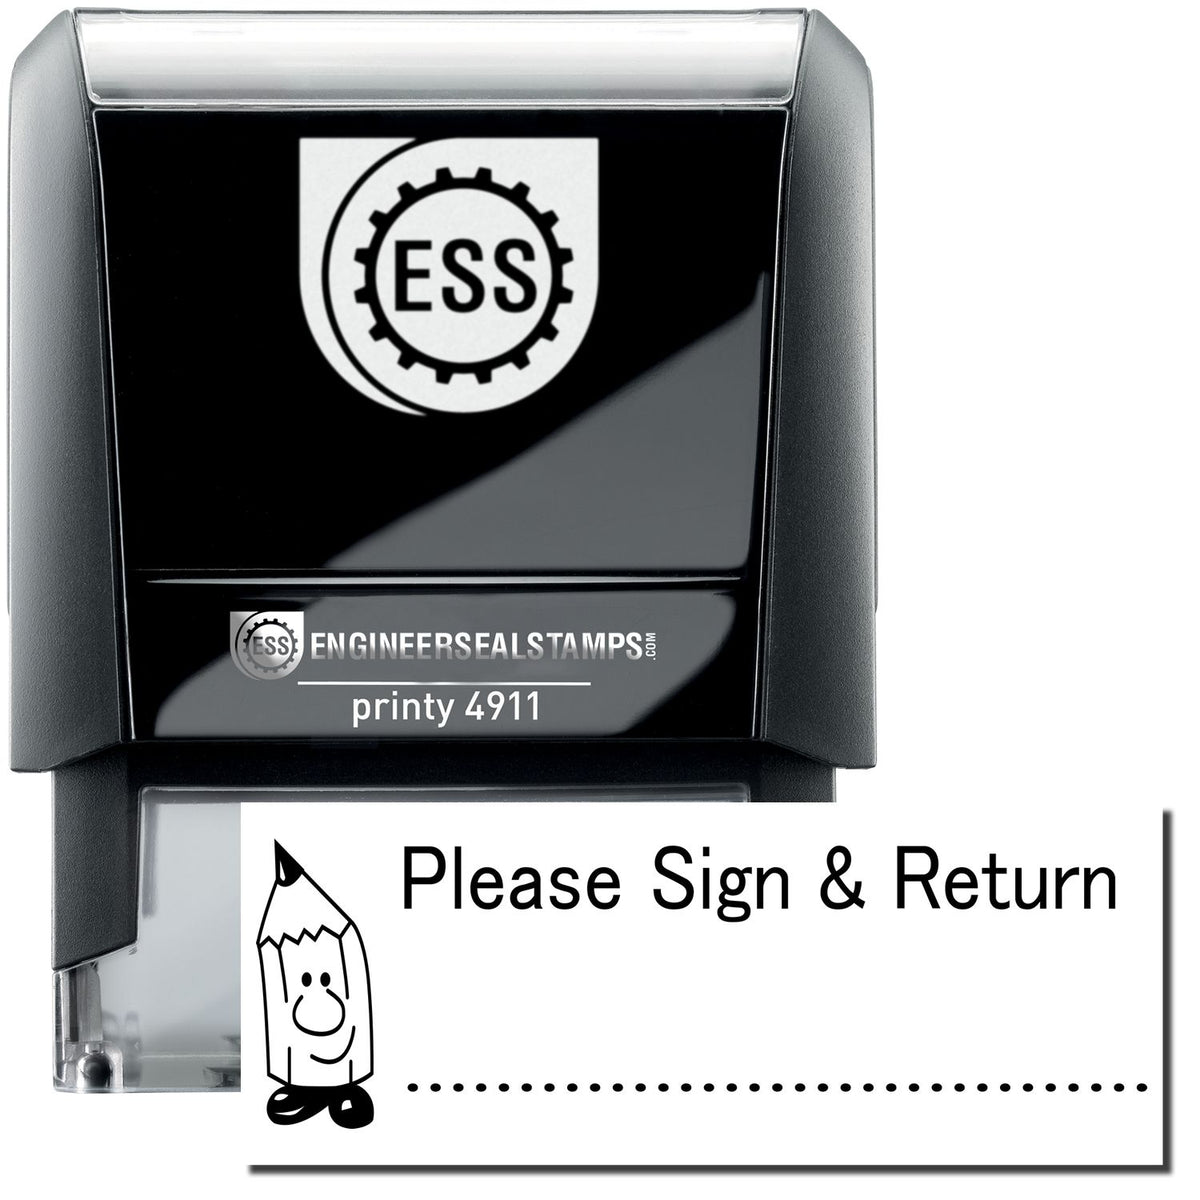 A self-inking stamp with a stamped image showing how the text &quot;Please Sign &amp; Return&quot; with an image of a sharpened pencil and a dotted line is displayed after stamping.